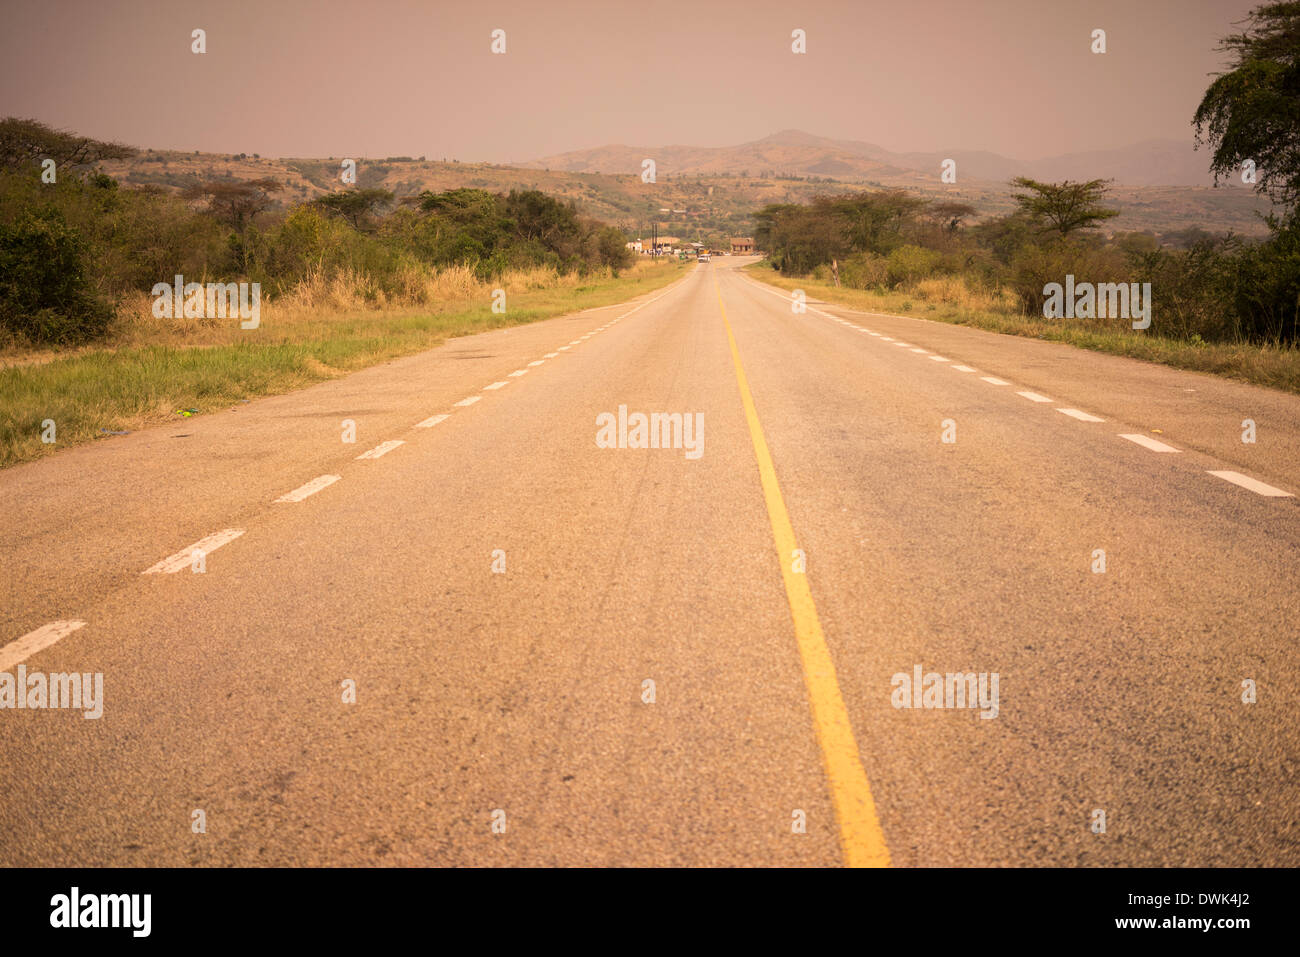 Road leading to a beautiful landscape in Uganda Africa at the equator. Stock Photo